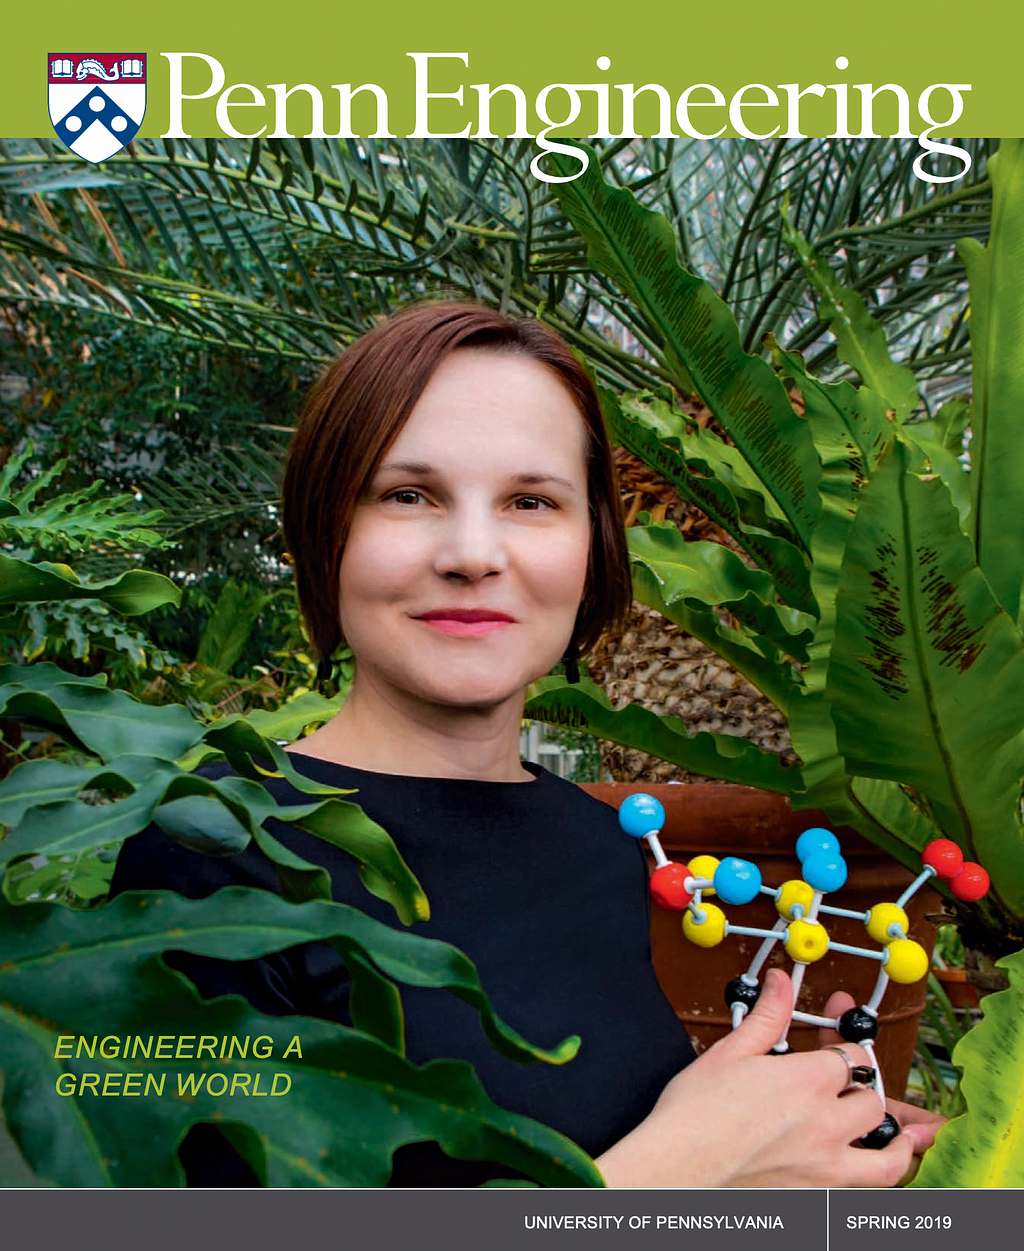 Aleksandra Vojvodic stands in a greenhouse, holding a model of a catalysis reaction.